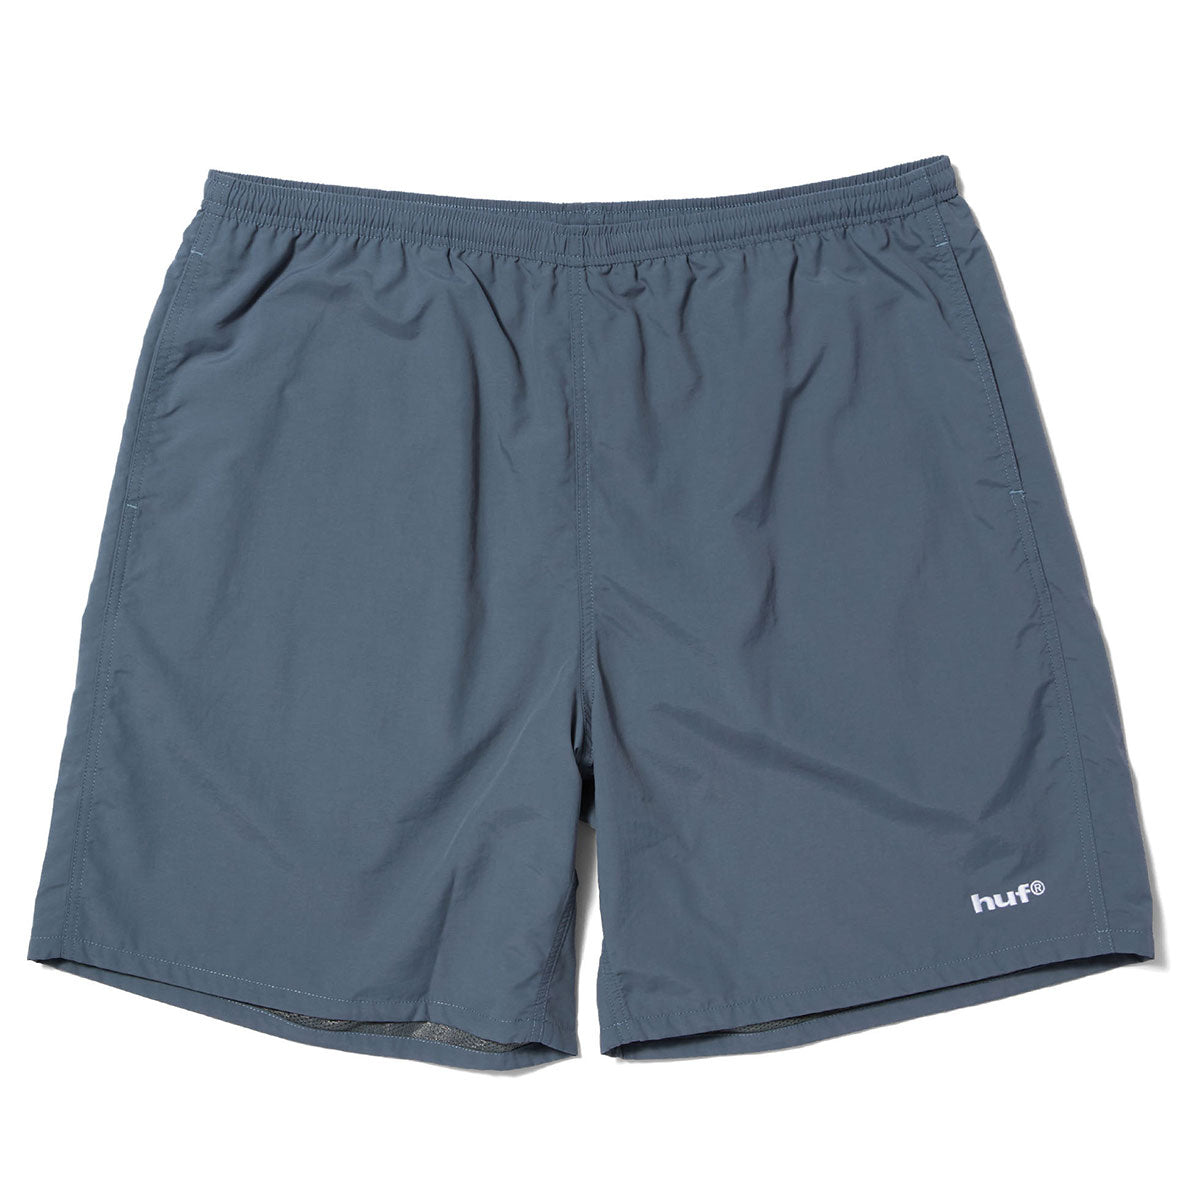 HUF Reservoir Dwr Easy Shorts - Frost Gray image 1